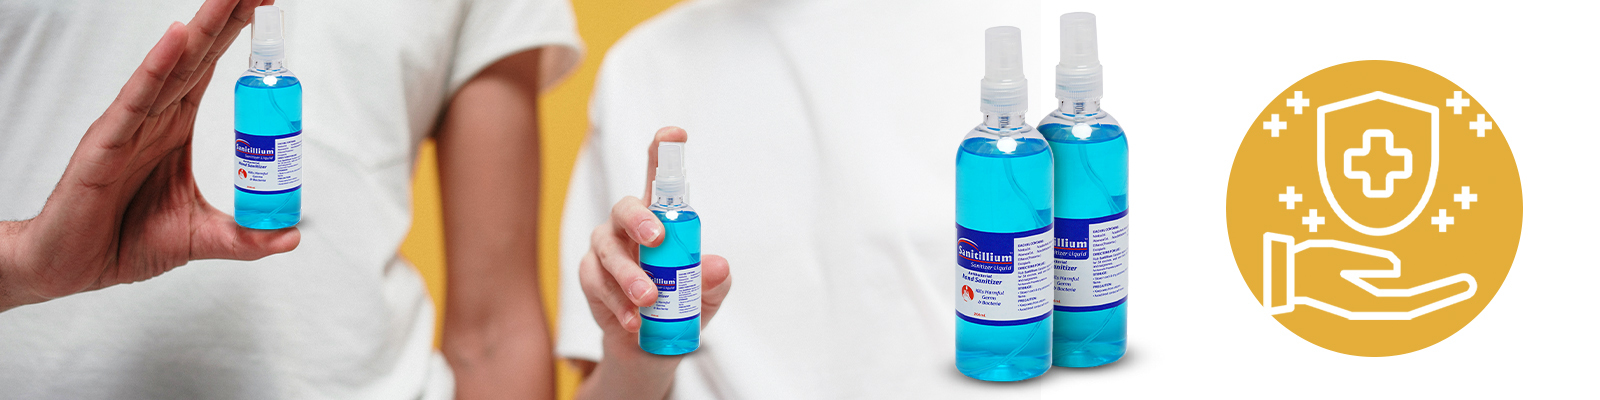 Hand Sanitizers - Just a Passing Trend or a Habit to Keep?